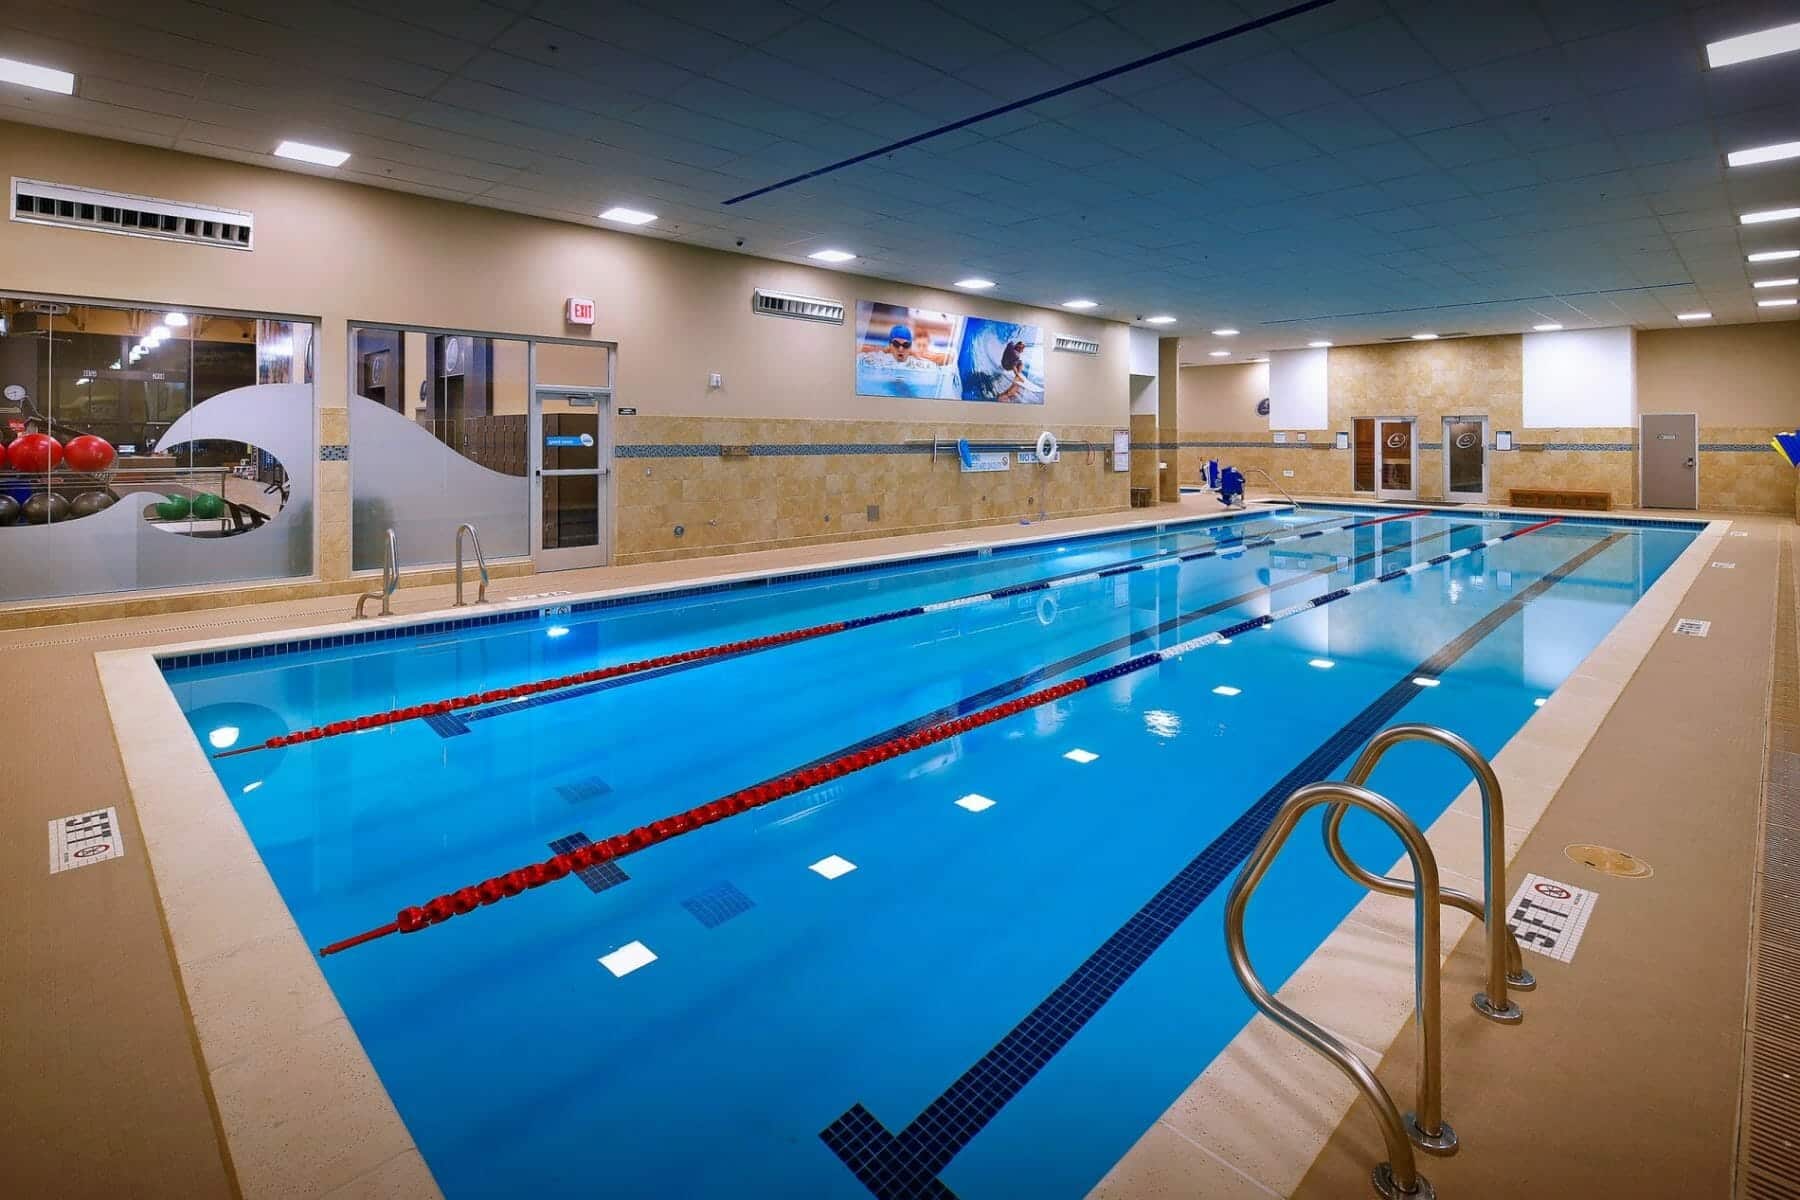 24 hour fitness pool locations